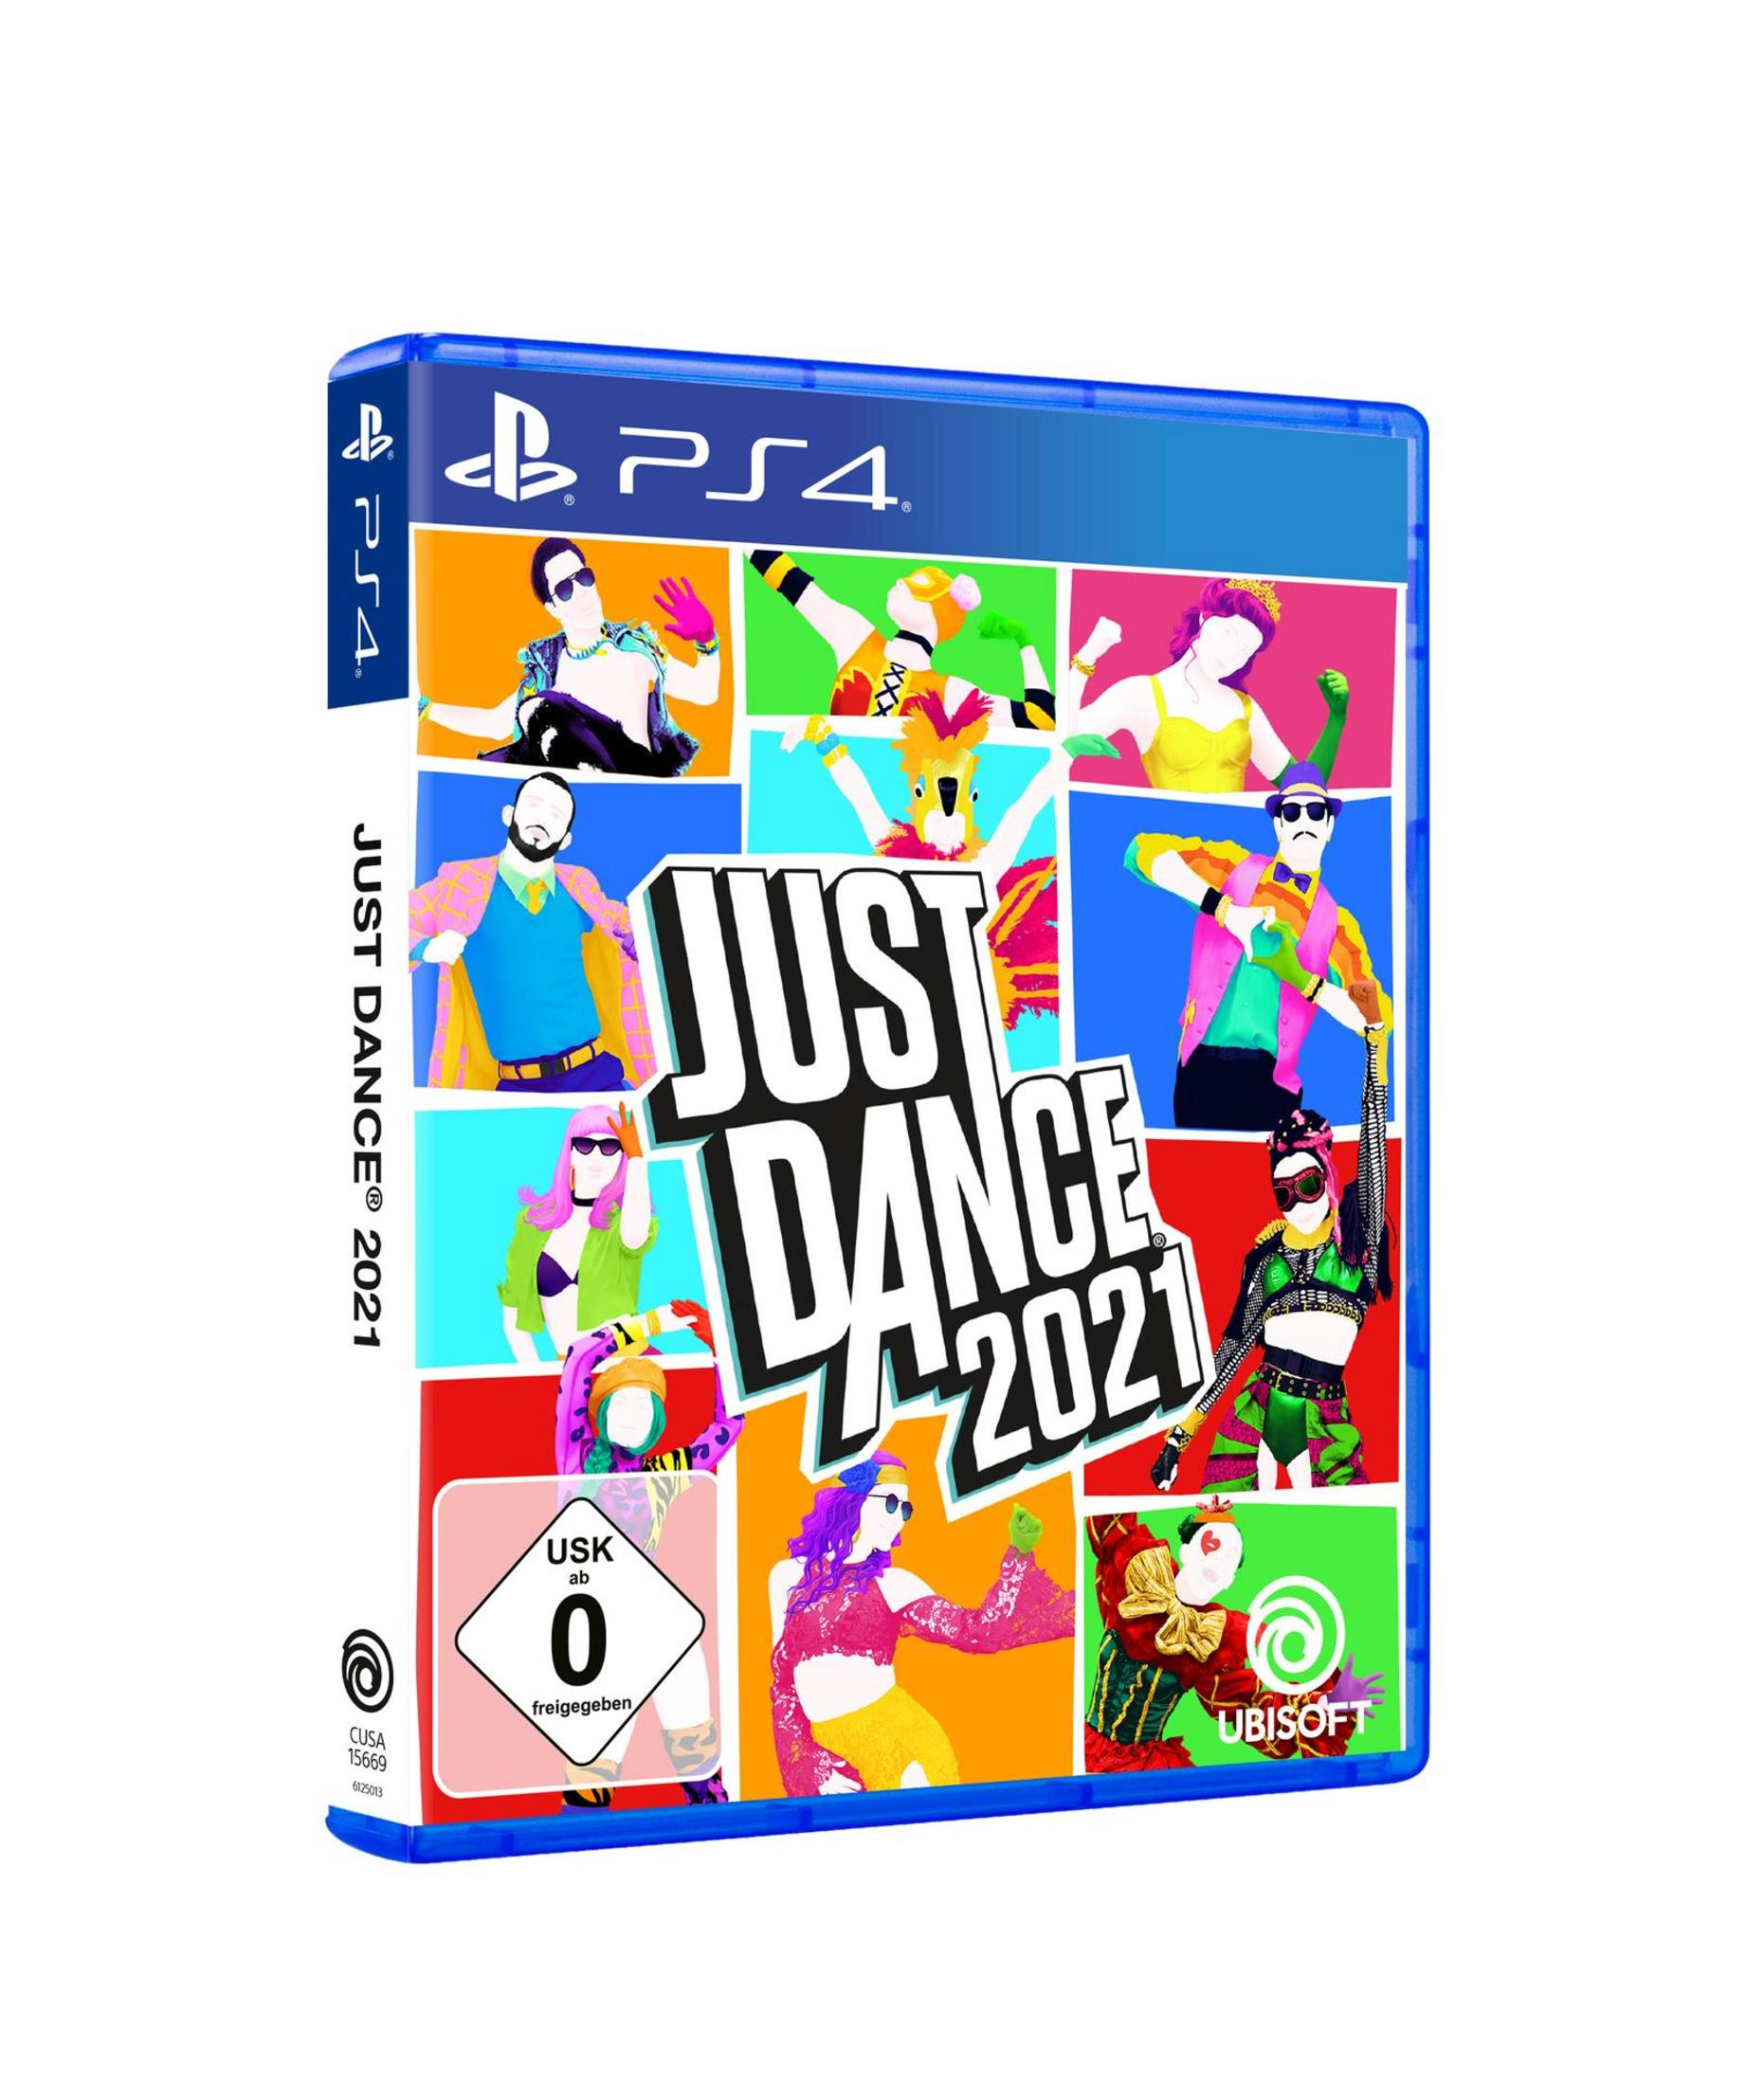 PS-4 4] Dance - [PlayStation 2021 Just